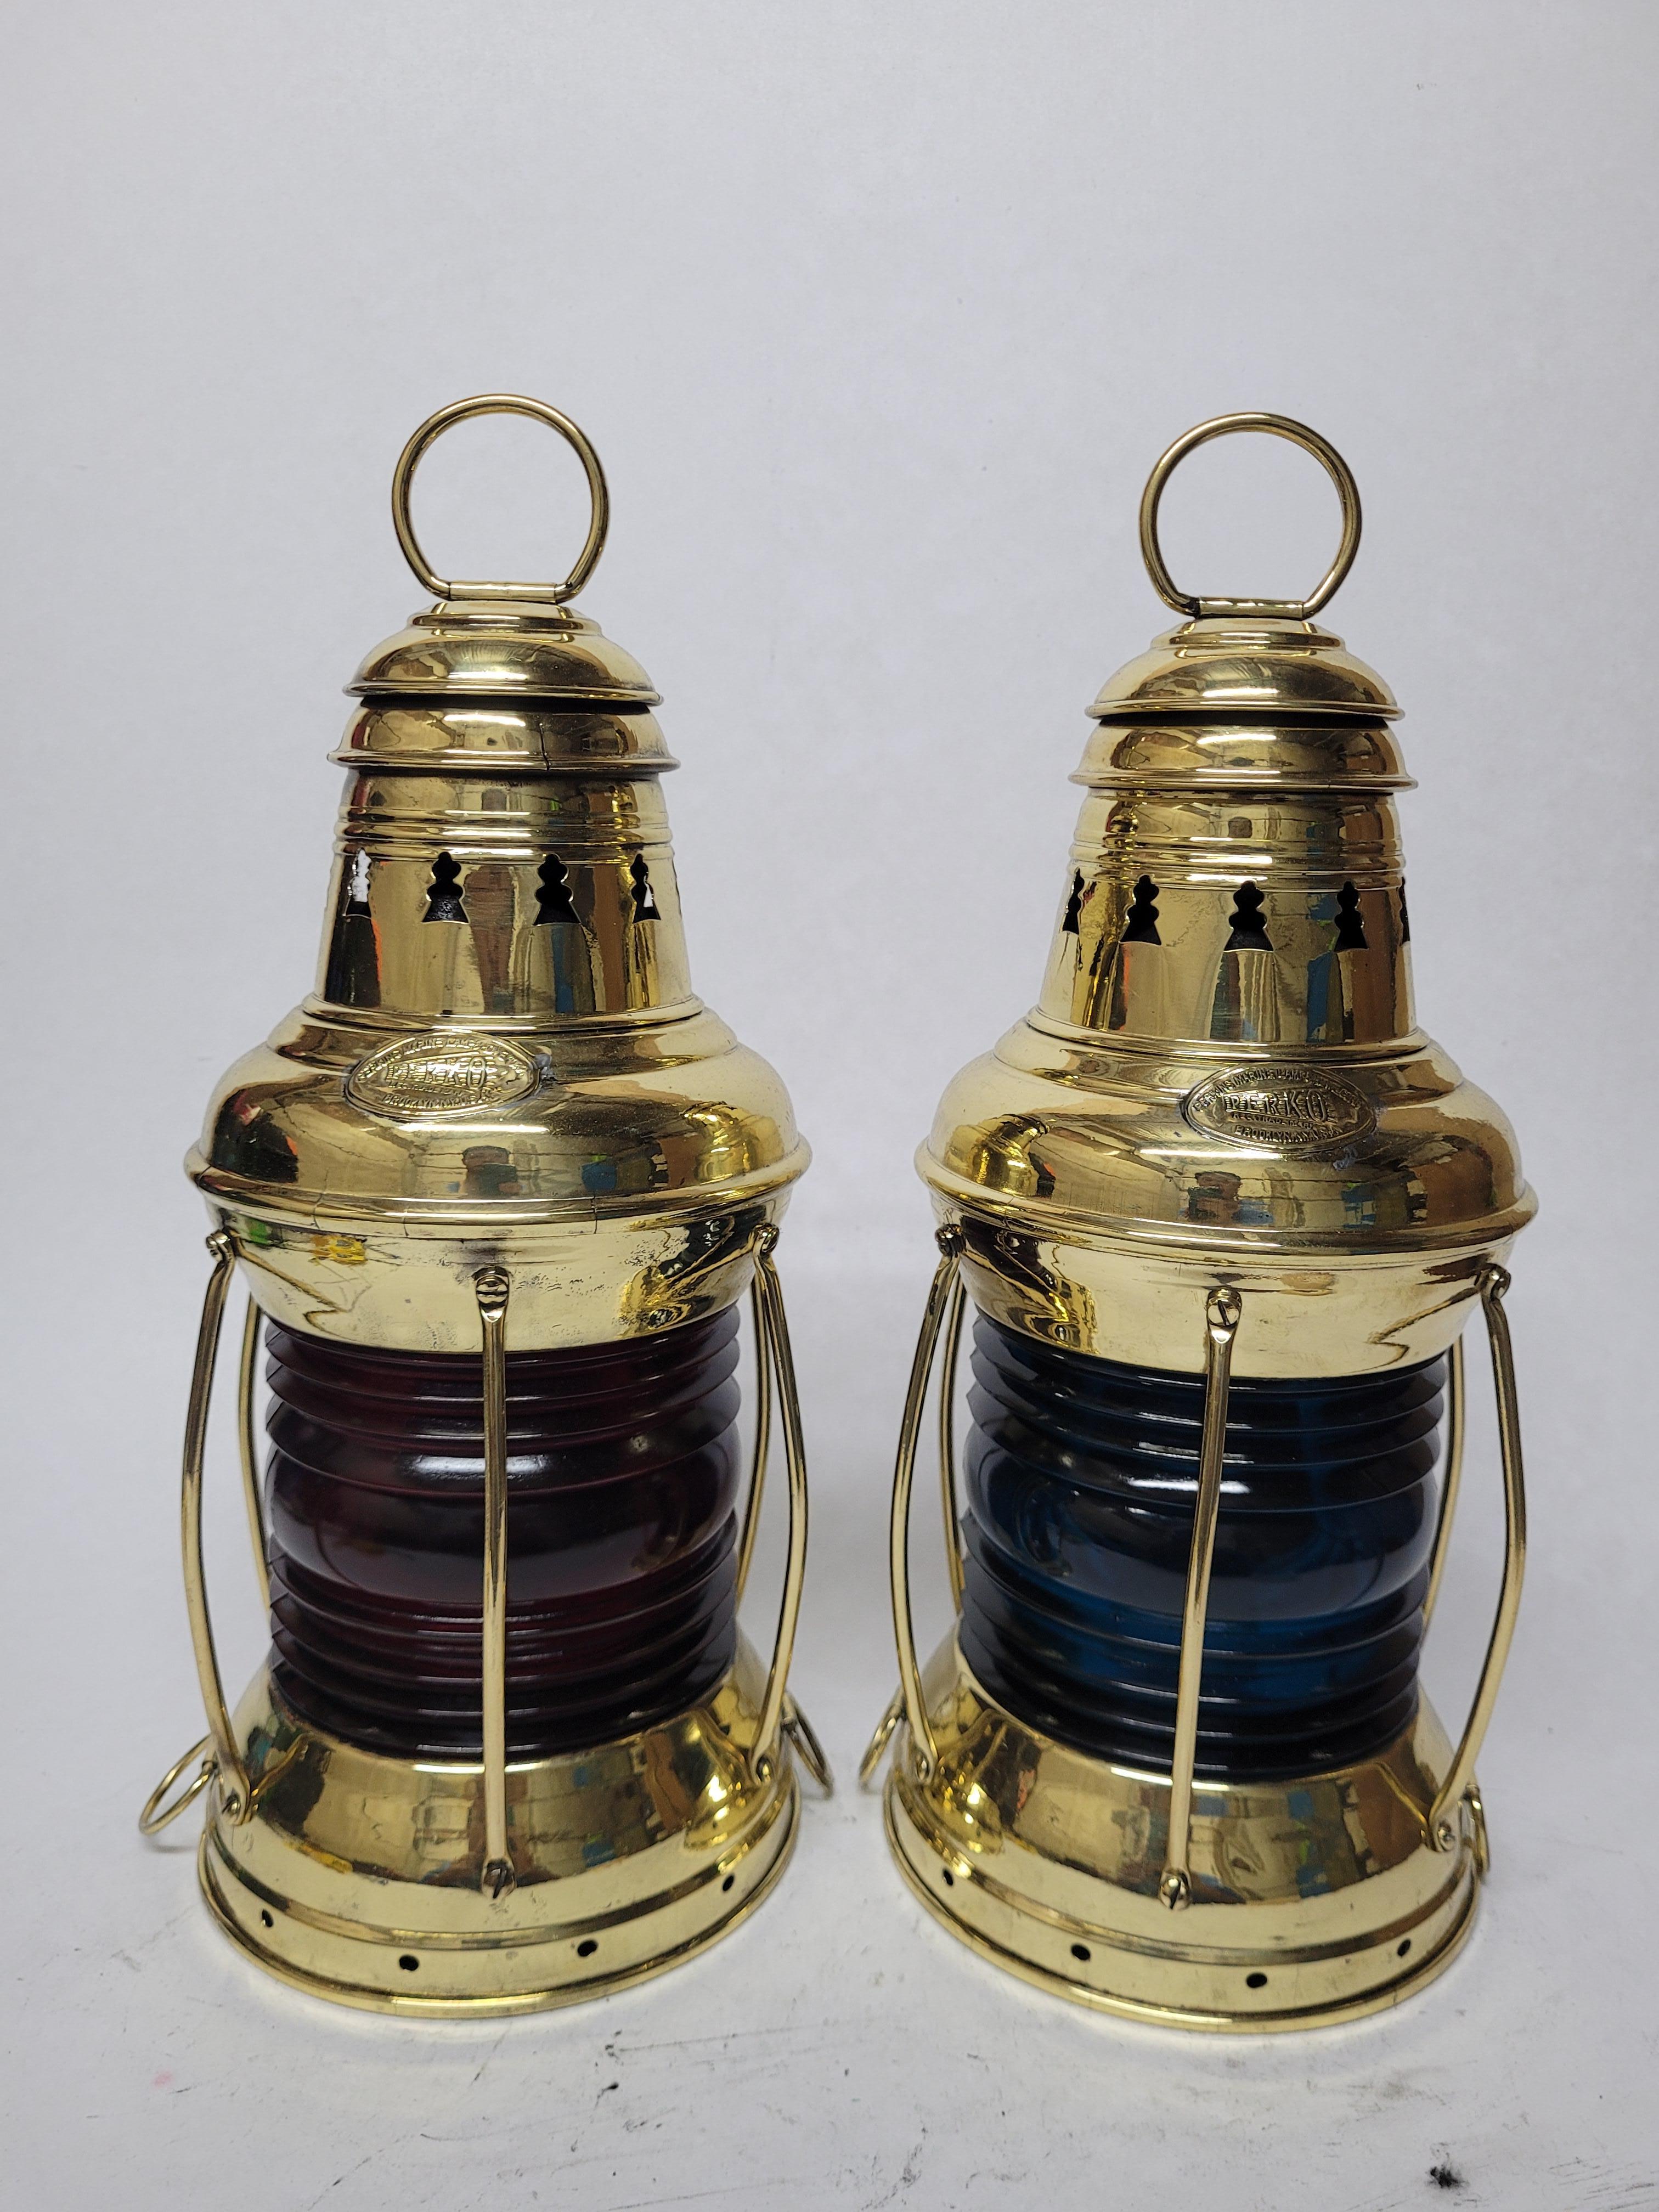 Exceptional Pair of Solid Brass Ships Lanterns In Good Condition For Sale In Norwell, MA